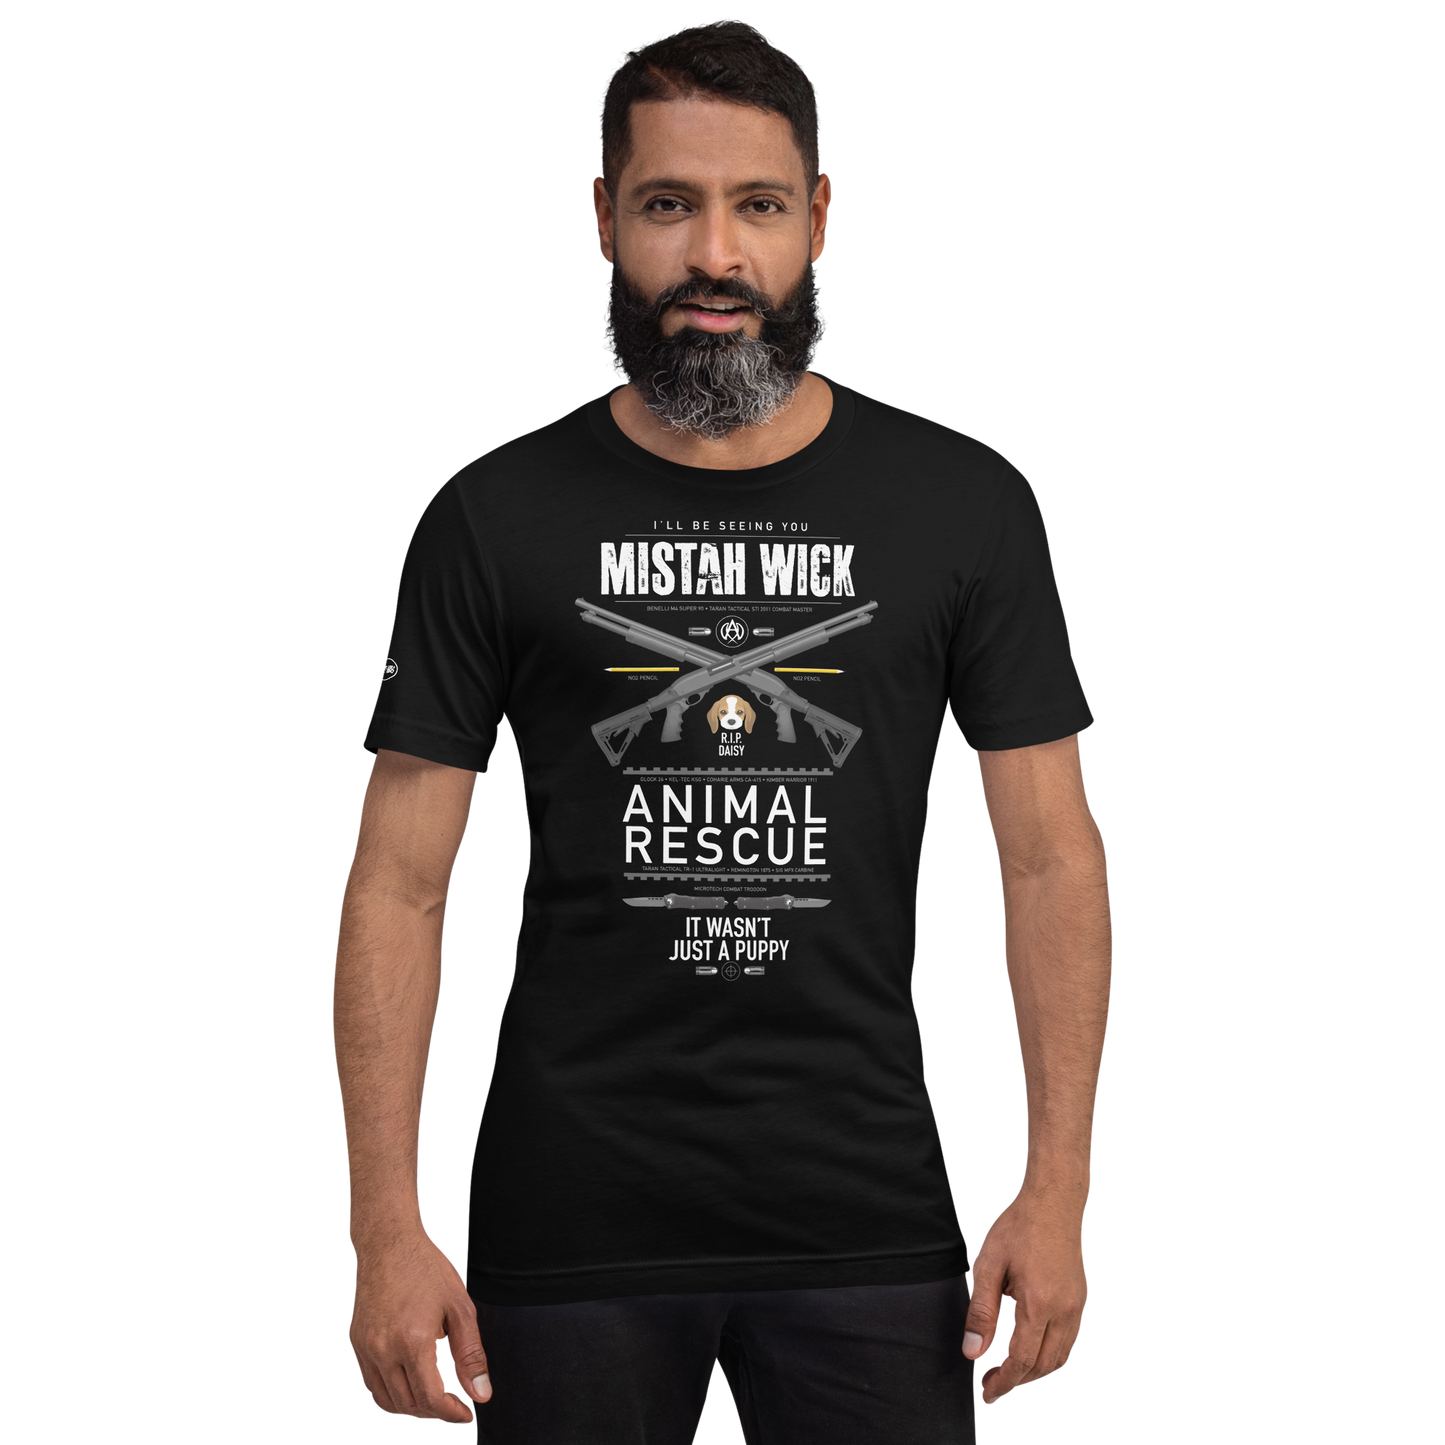 Mistah Wick Animal Rescue - Funny T-Shirt